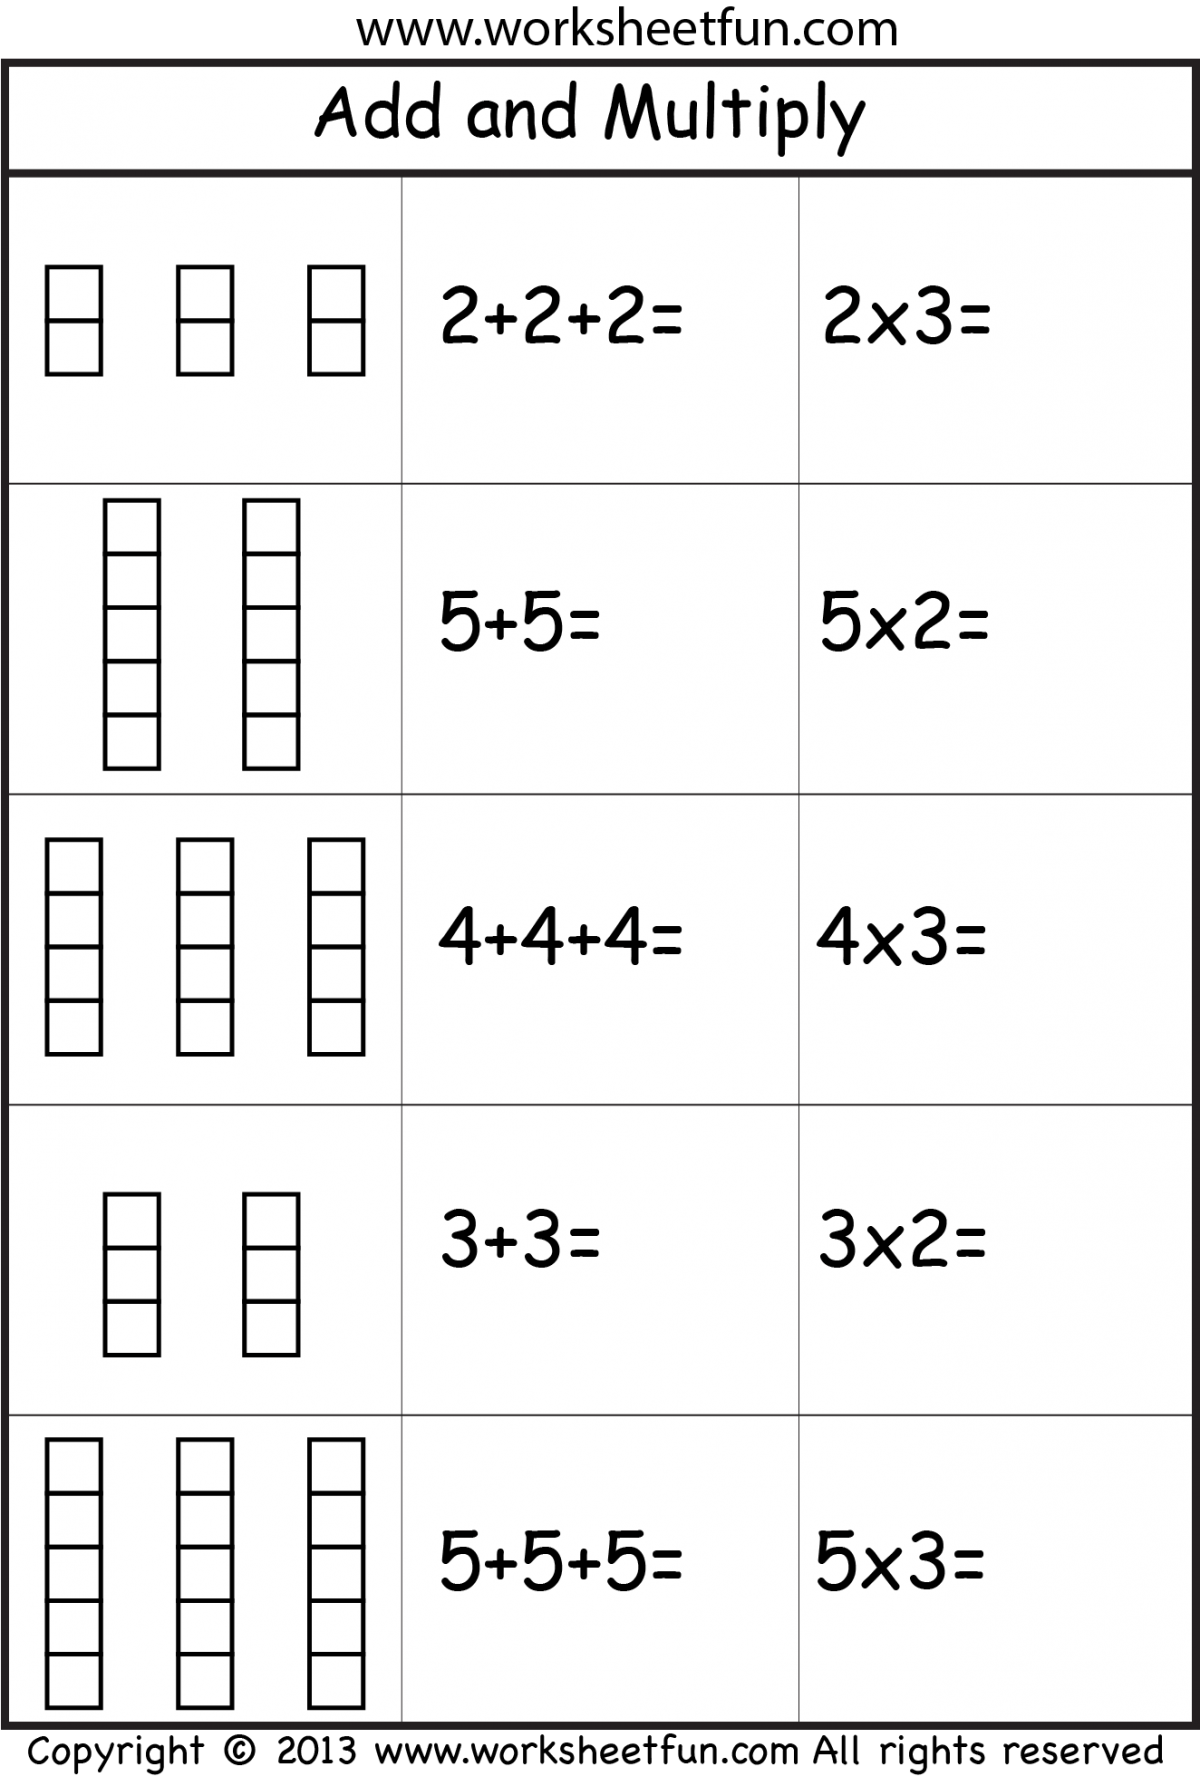 Multiplication Facts Worksheets 5th Grade Free Printable